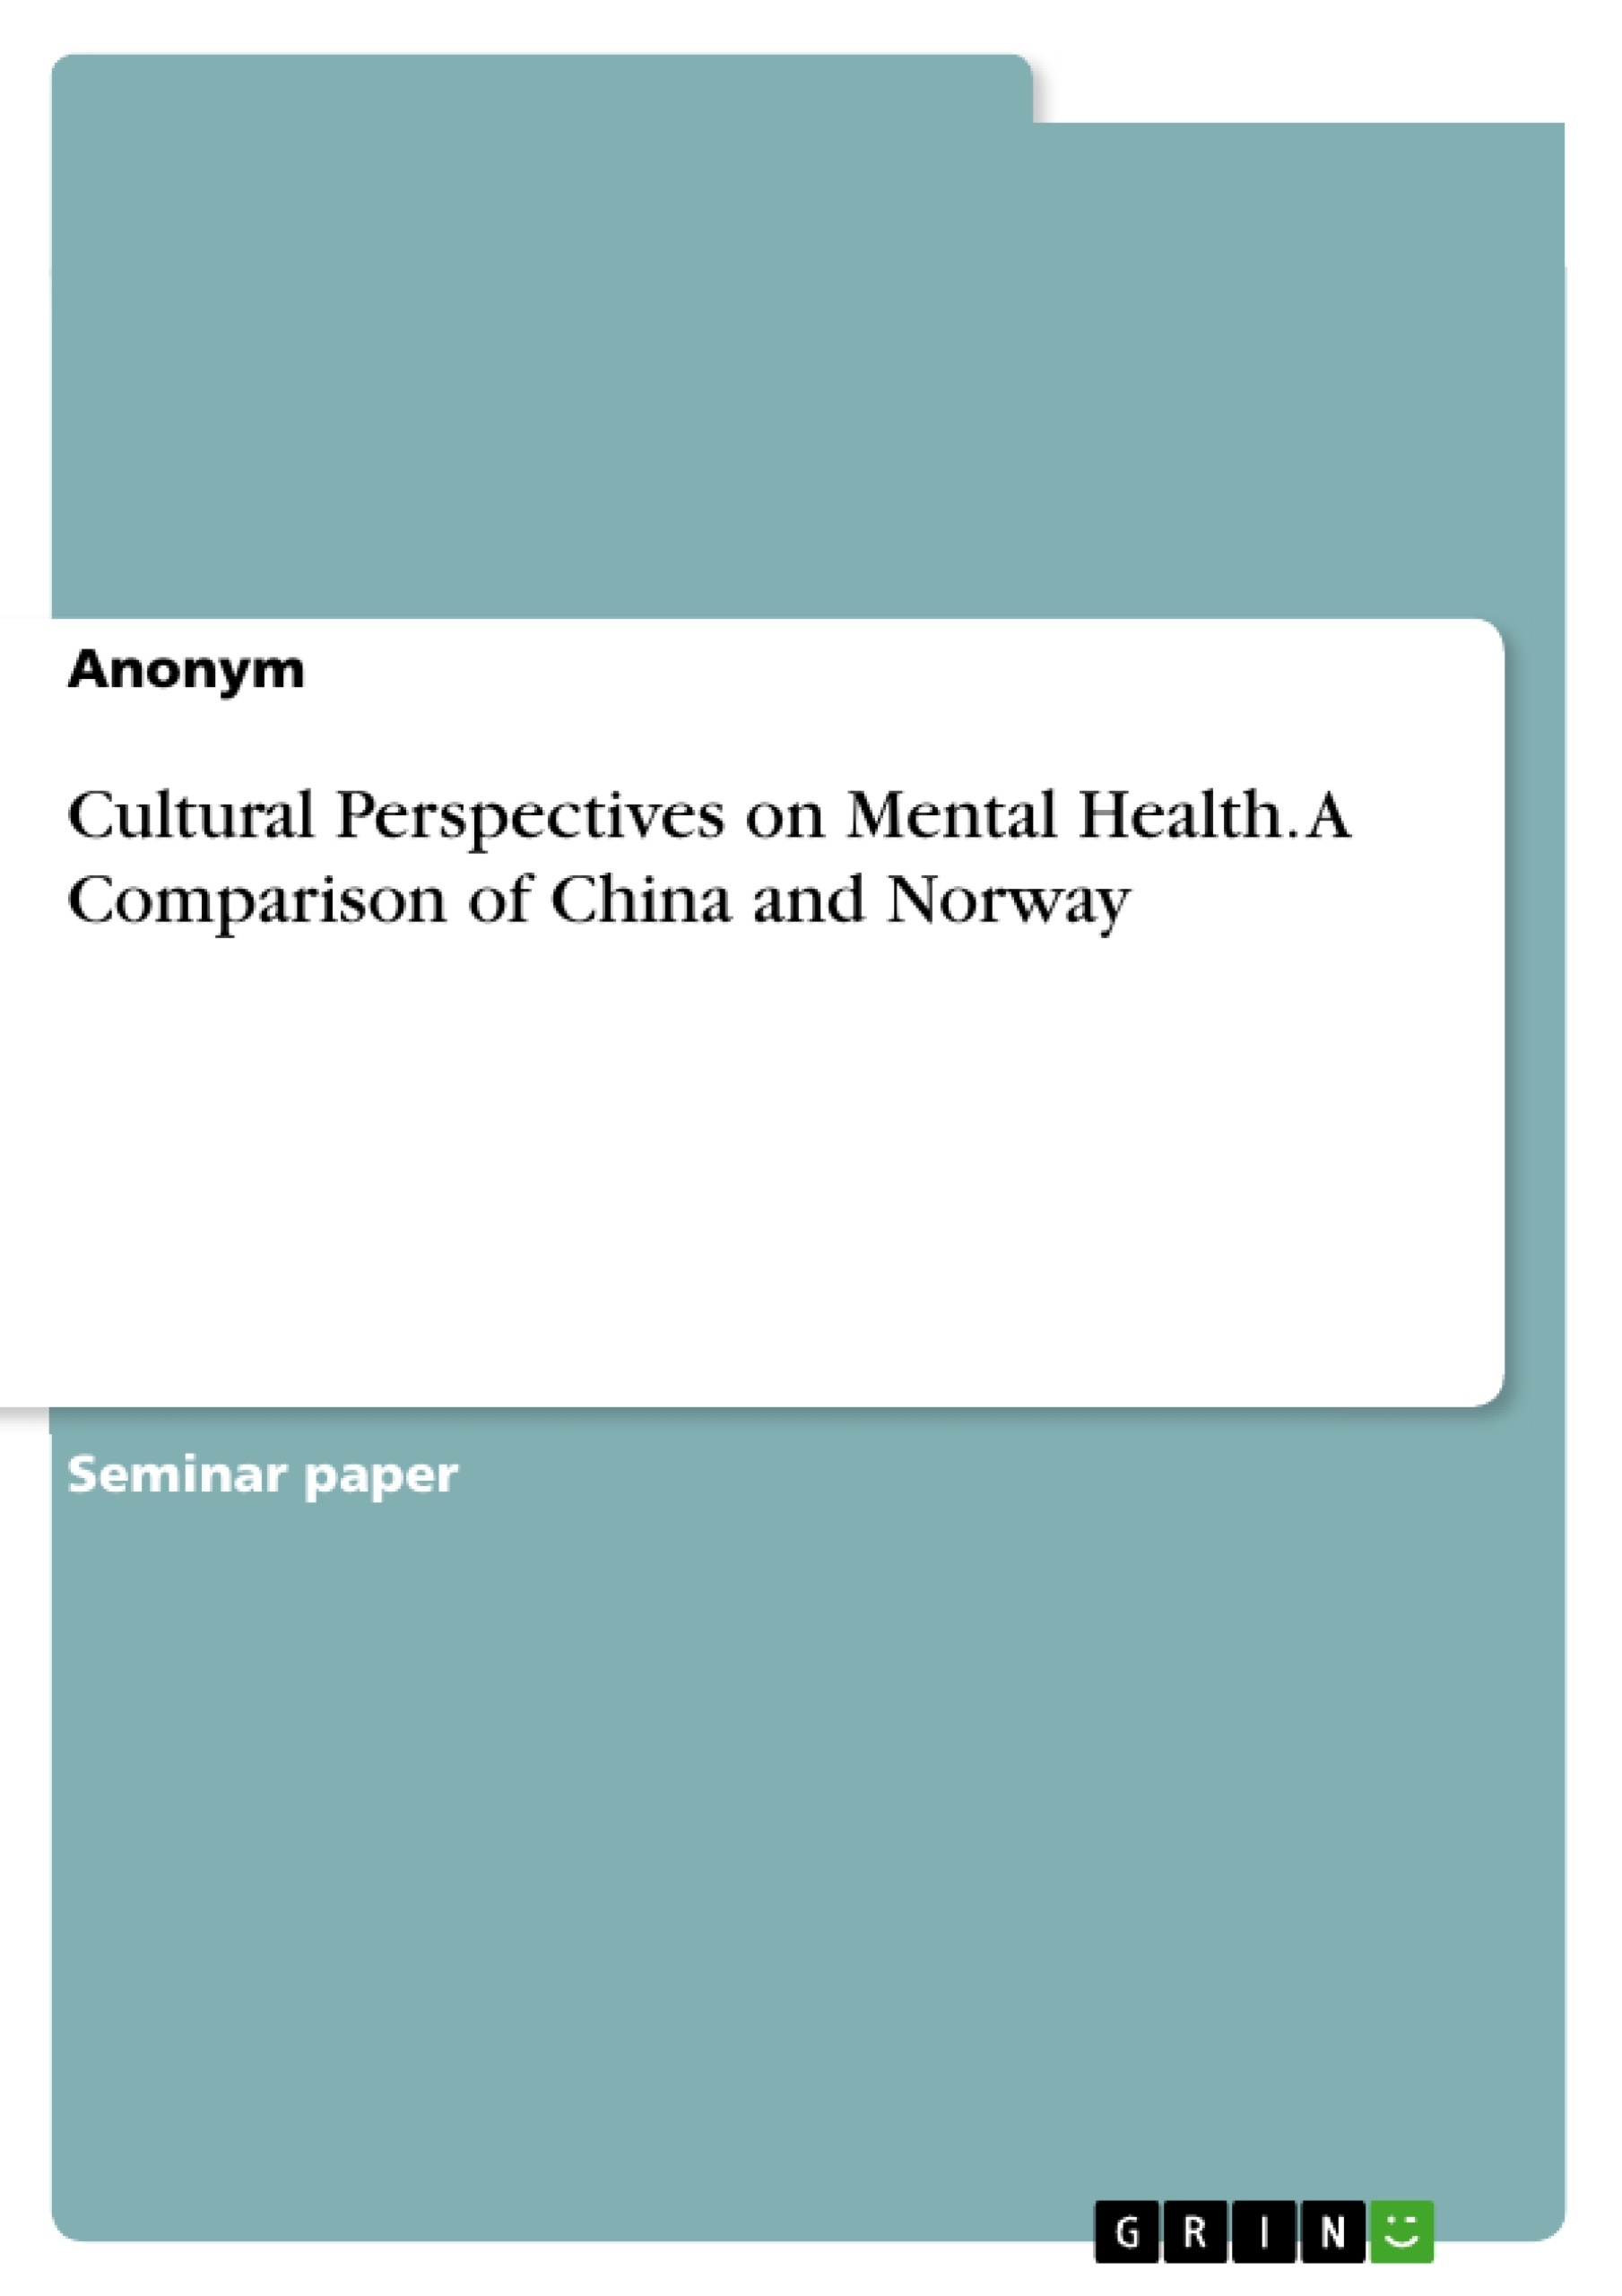 Title: Cultural Perspectives on Mental Health. A Comparison of China and Norway